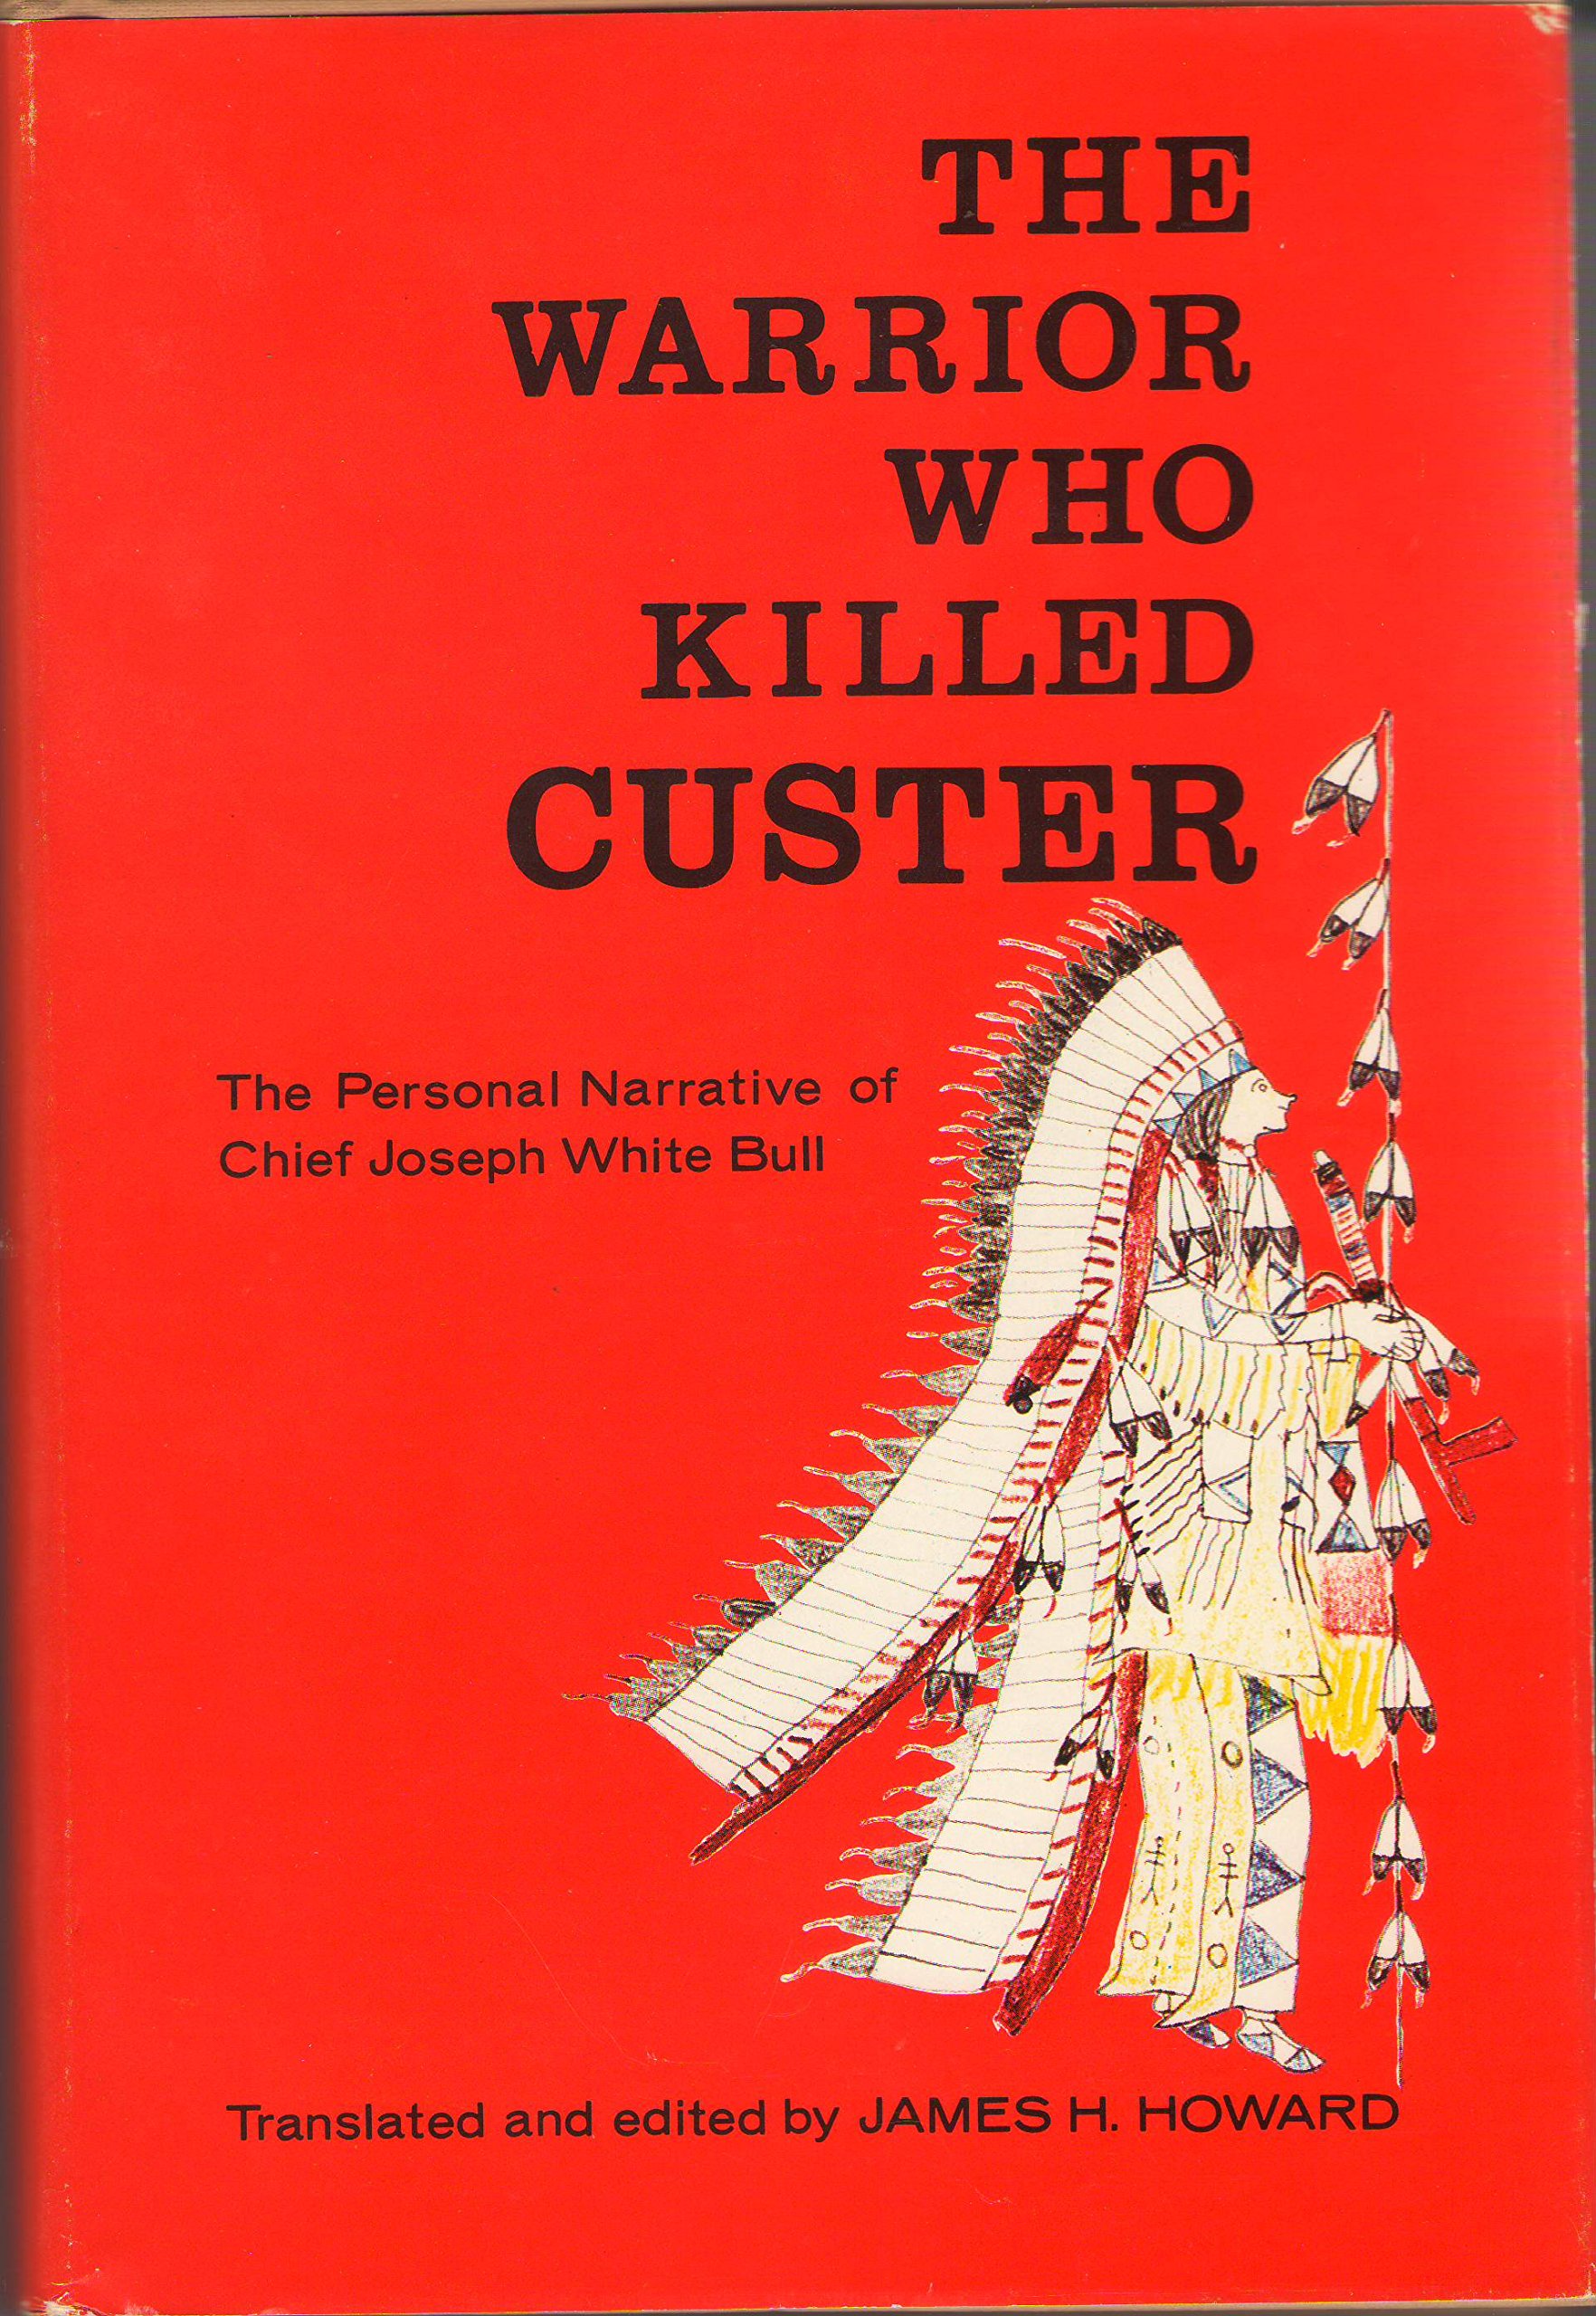 The warrior who killed Custer: The personal narrative of Chief Joseph White Bull (book cover)